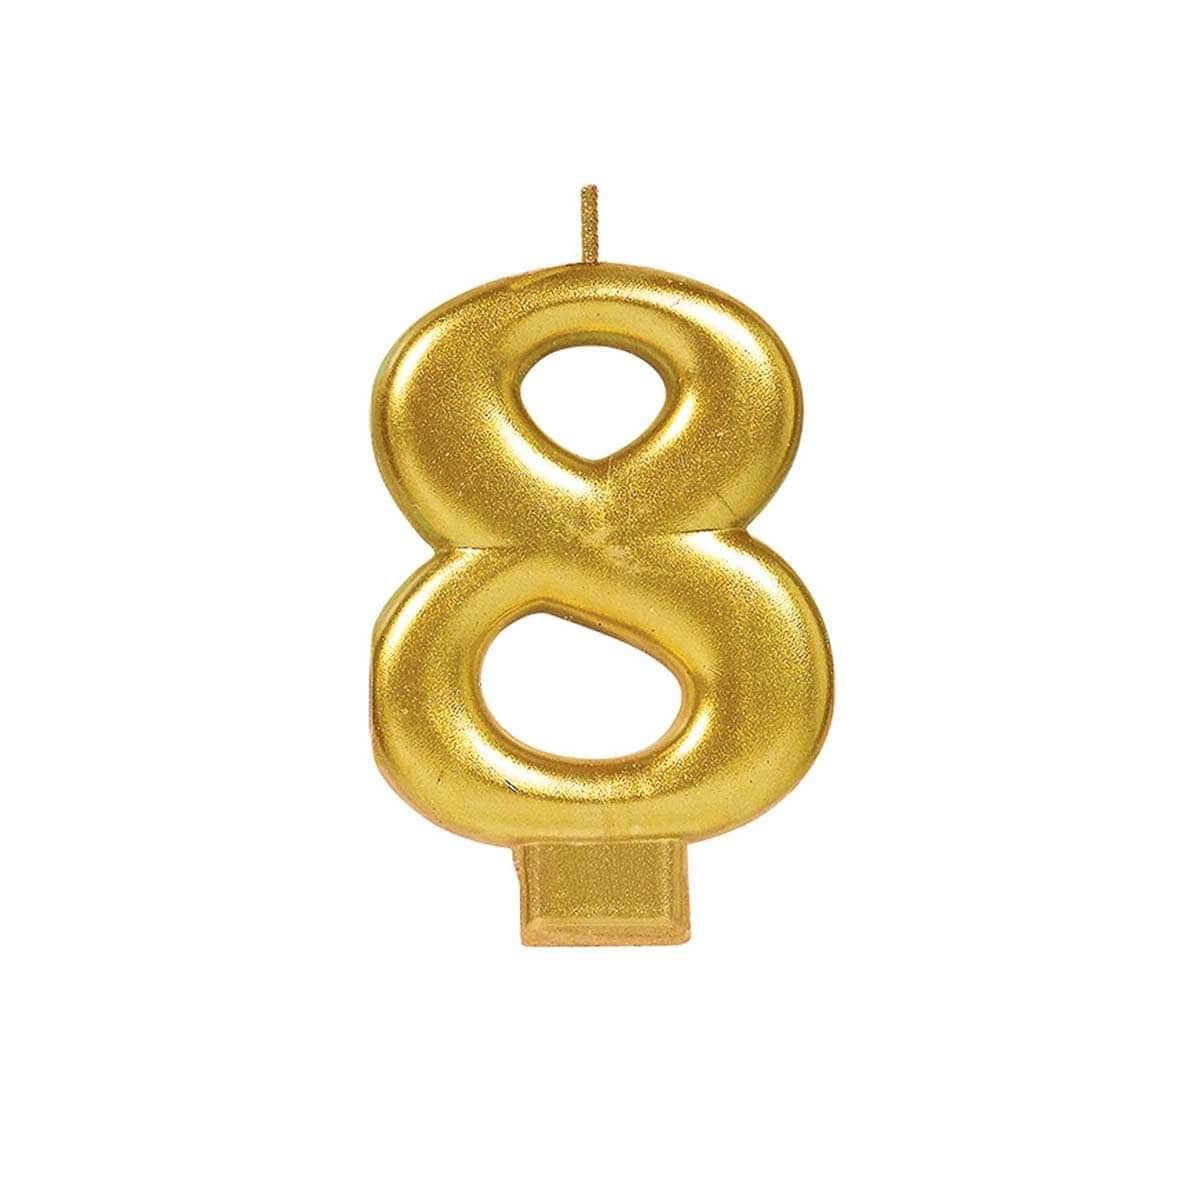 Buy Cake Supplies Metallic Numeral Candle #8 - Gold sold at Party Expert